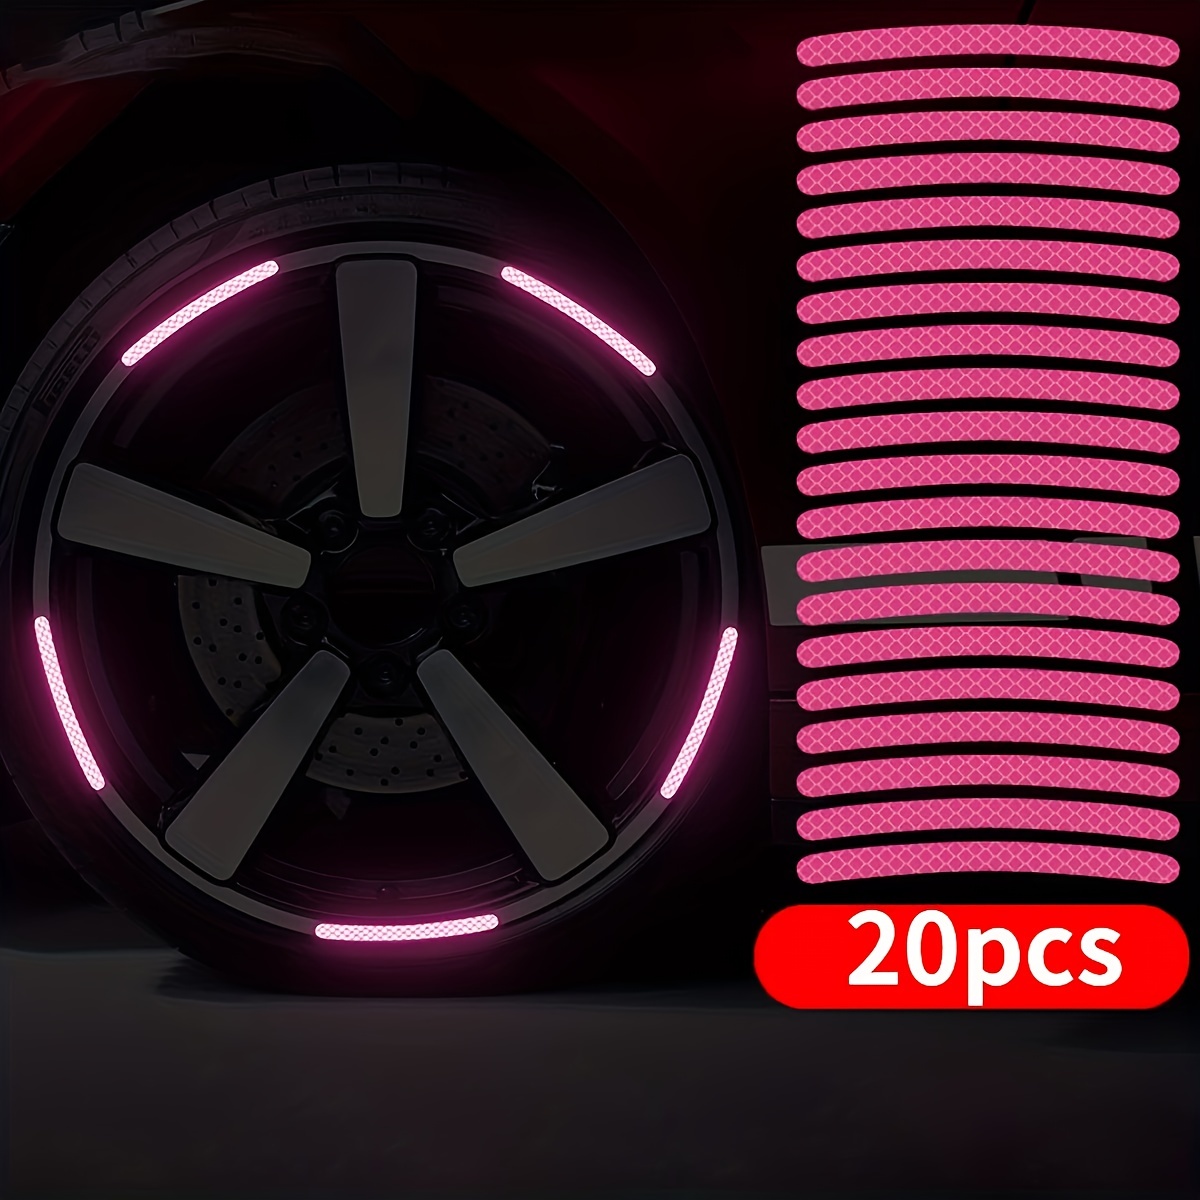  40PCS Car Stickers Glowing Wheel Hub Sticker Car Stripe  Decals, Luminous Car Stickers for Night Driving, High Reflective Wheel  Stickers Decoration Universal for Car Bike Motorcycle Truck (40PCS)